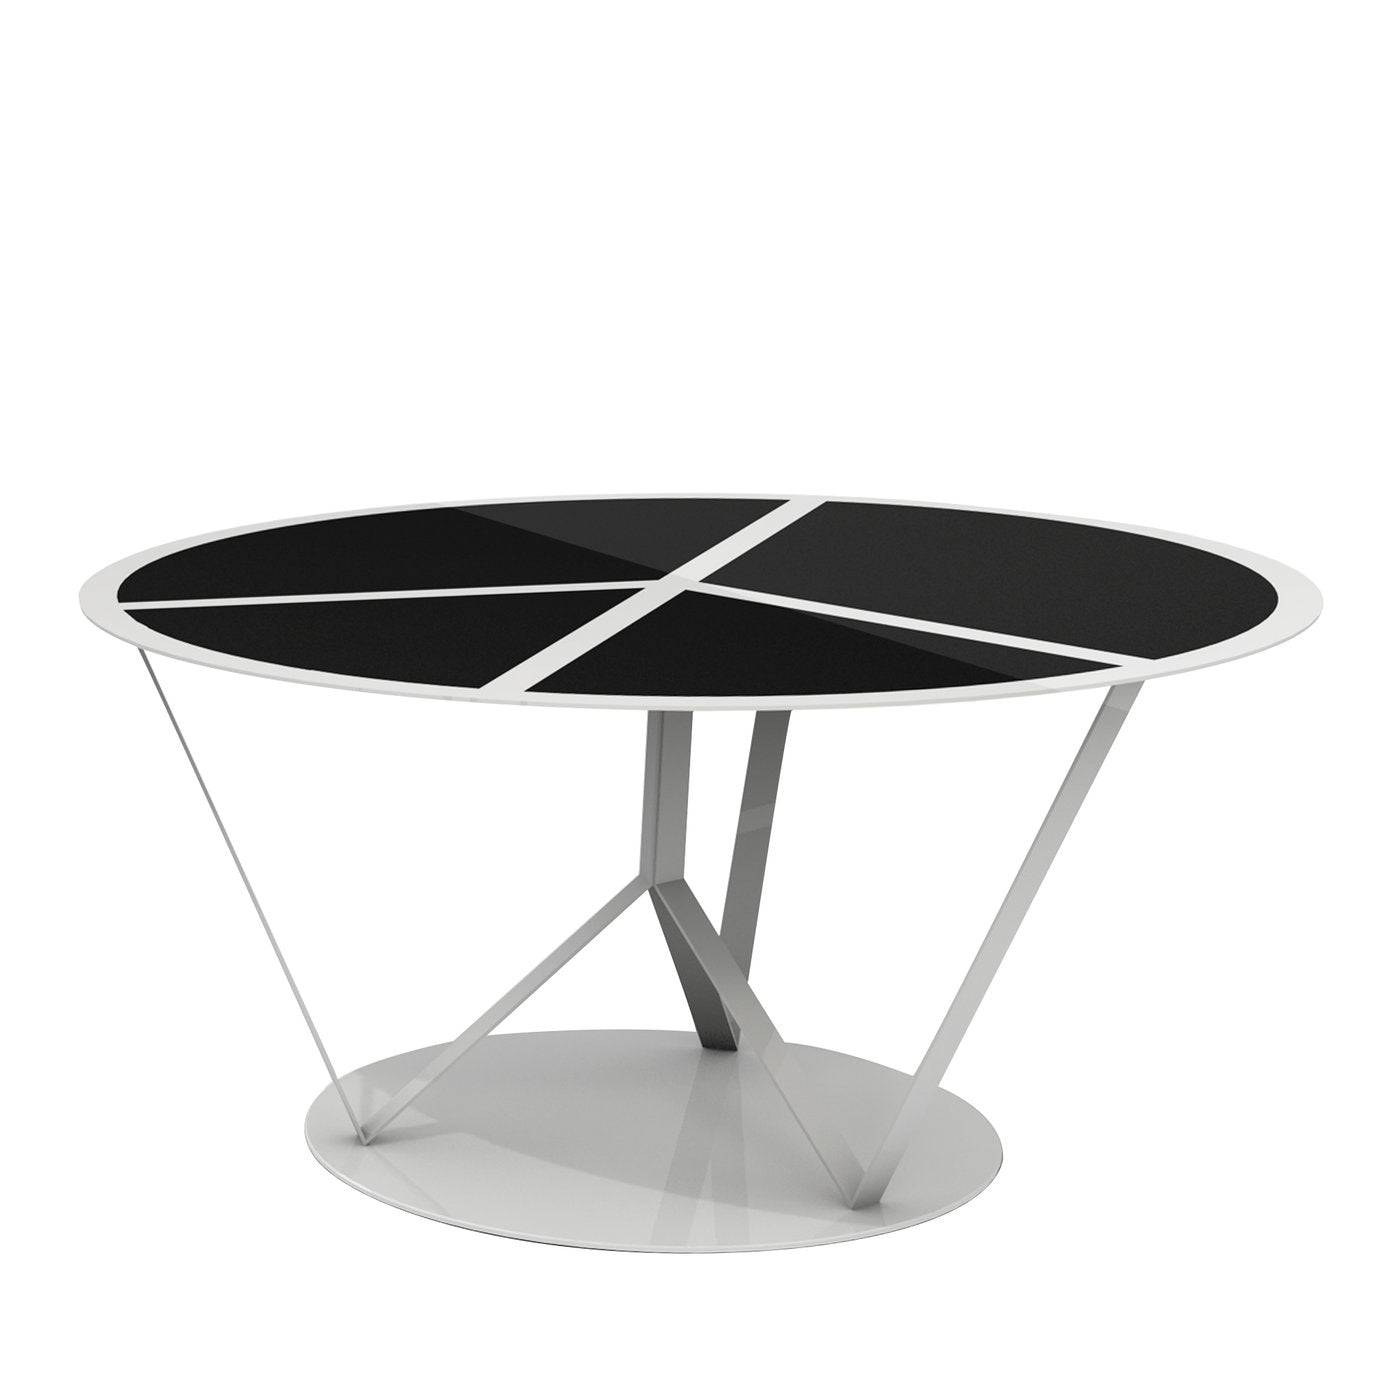 Pace White Table with Black by Garilab by Piter Perbellini - Main view